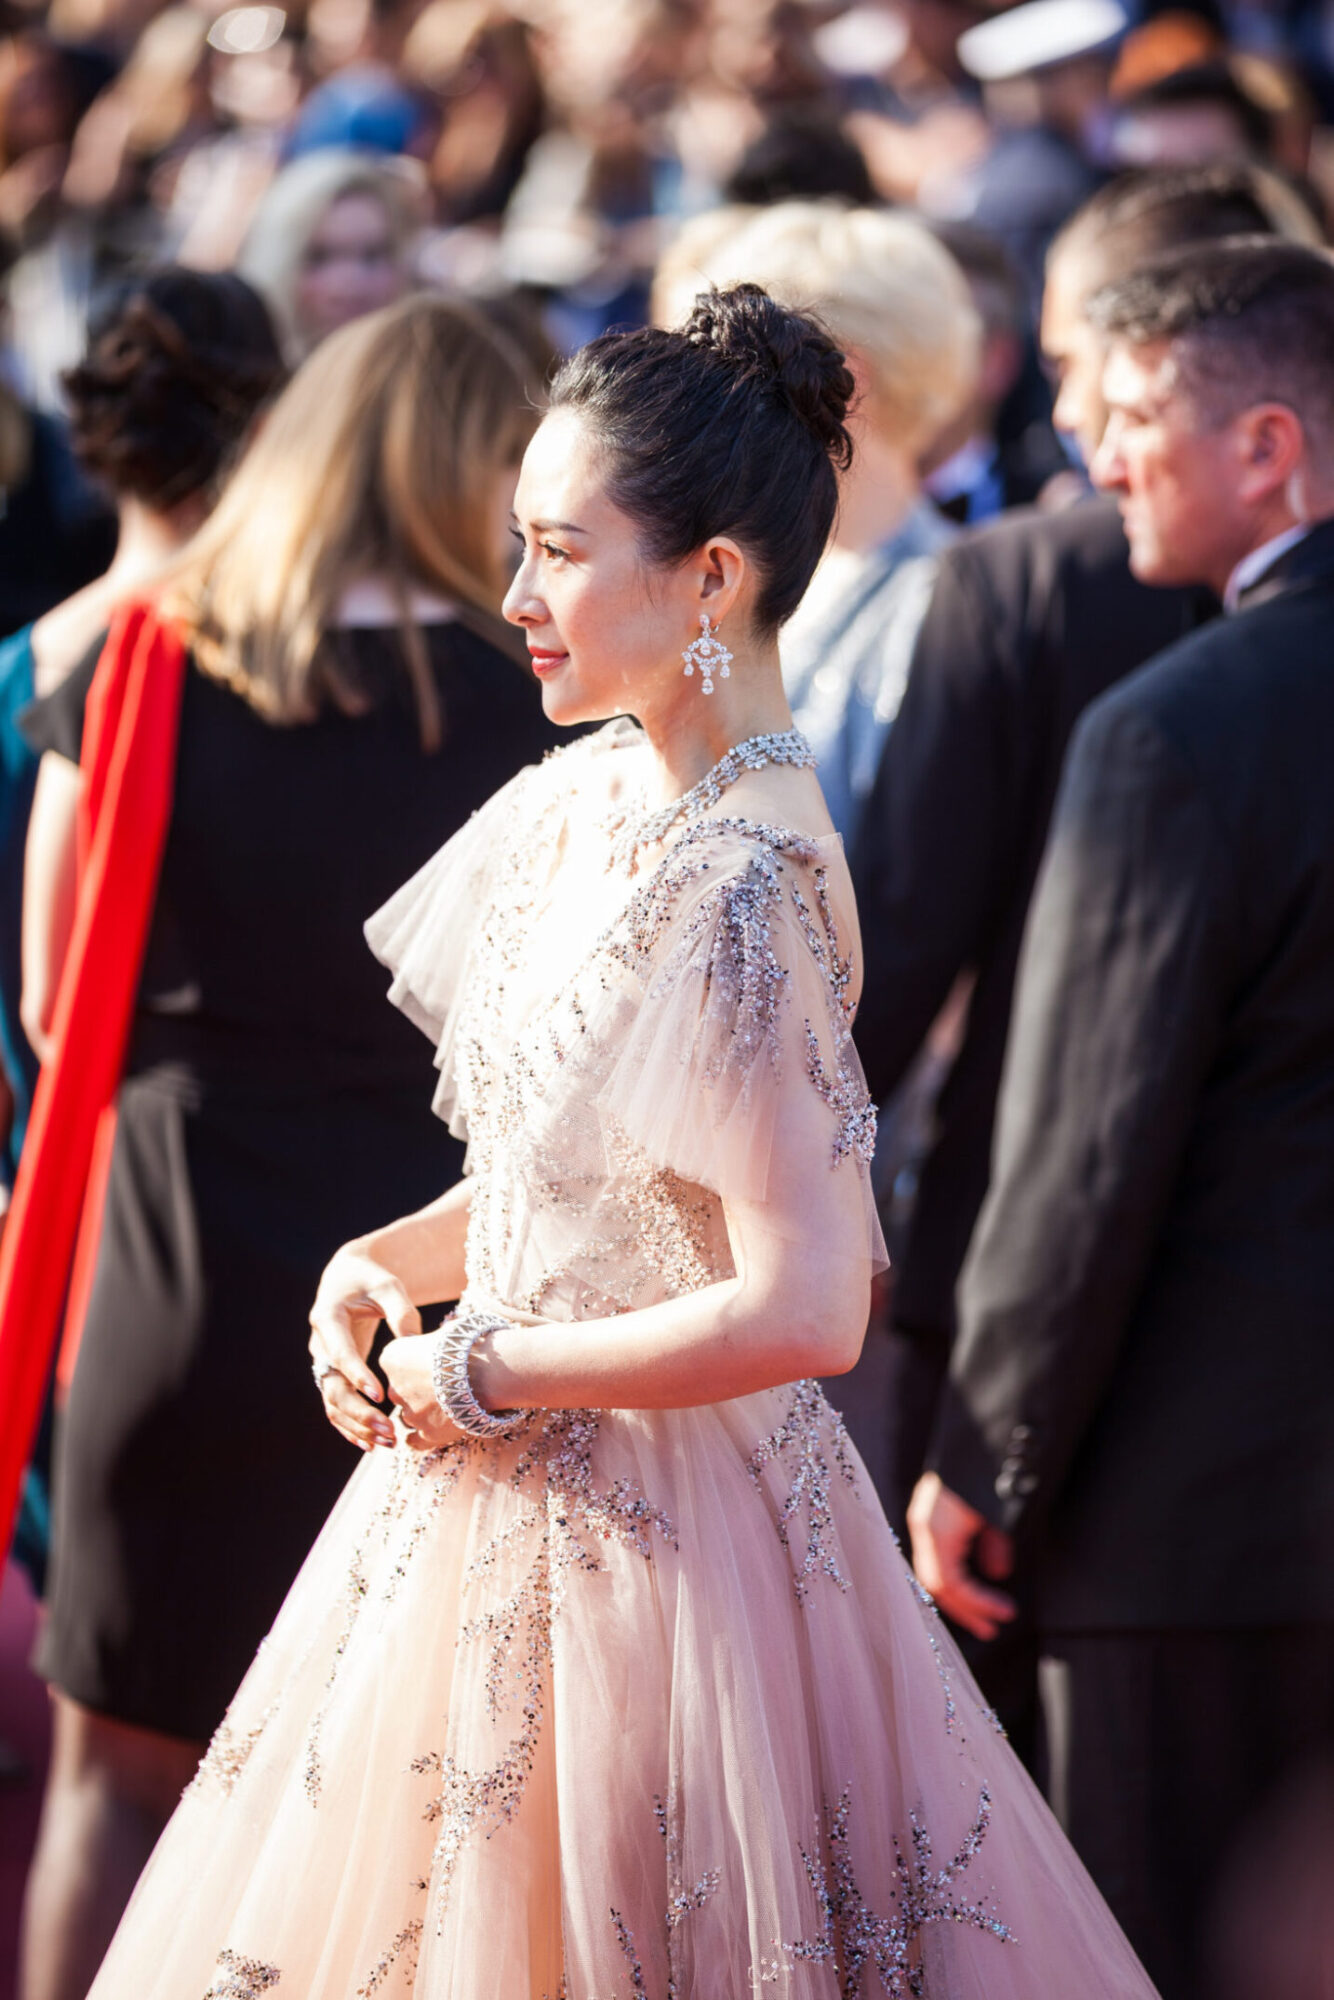 Zhang Ziyi attending Closing Ceremony of the Cannes Film Festival, 2019